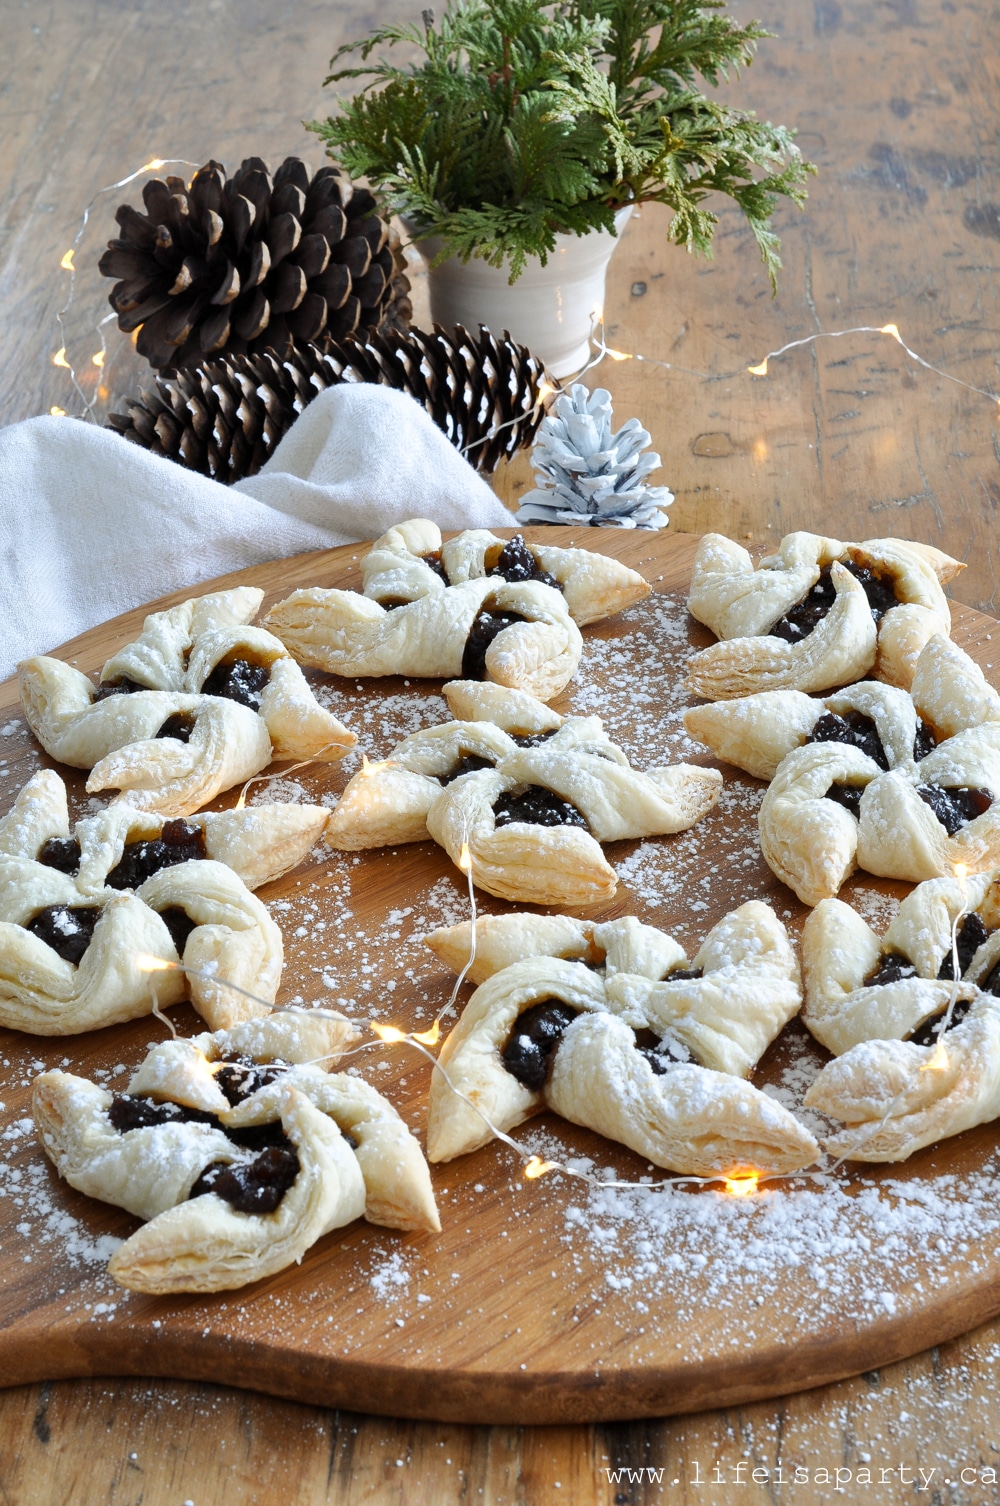 Mincemeat Pinwheels: This quick and easy recipe uses jarred mincemeat and frozen puff pastry for a delicious addition to any Christmas dessert tray.